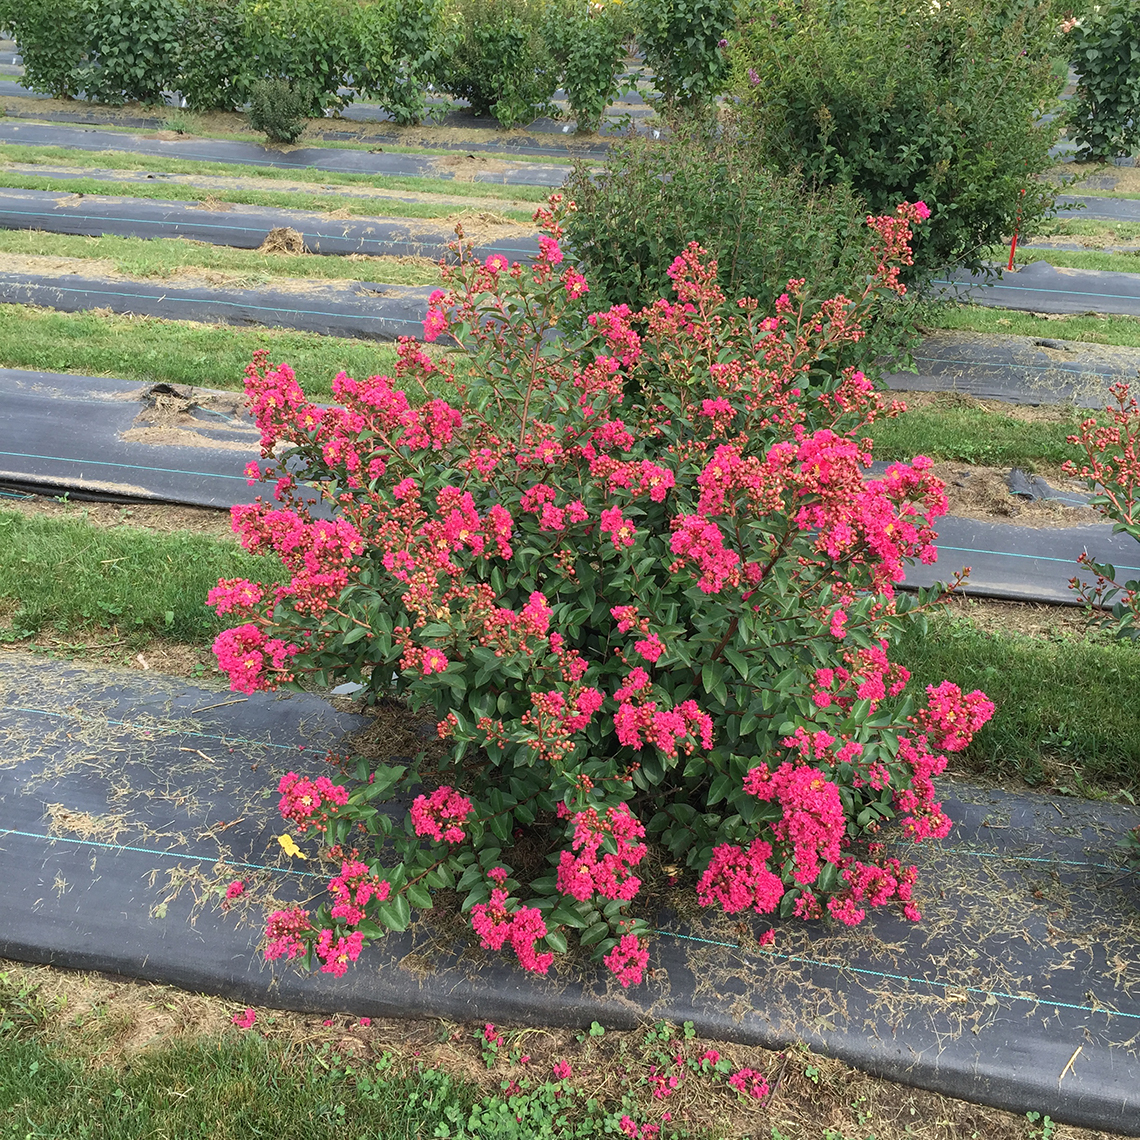 Infinitini Magenta Lagerstroemia blooming in trial field